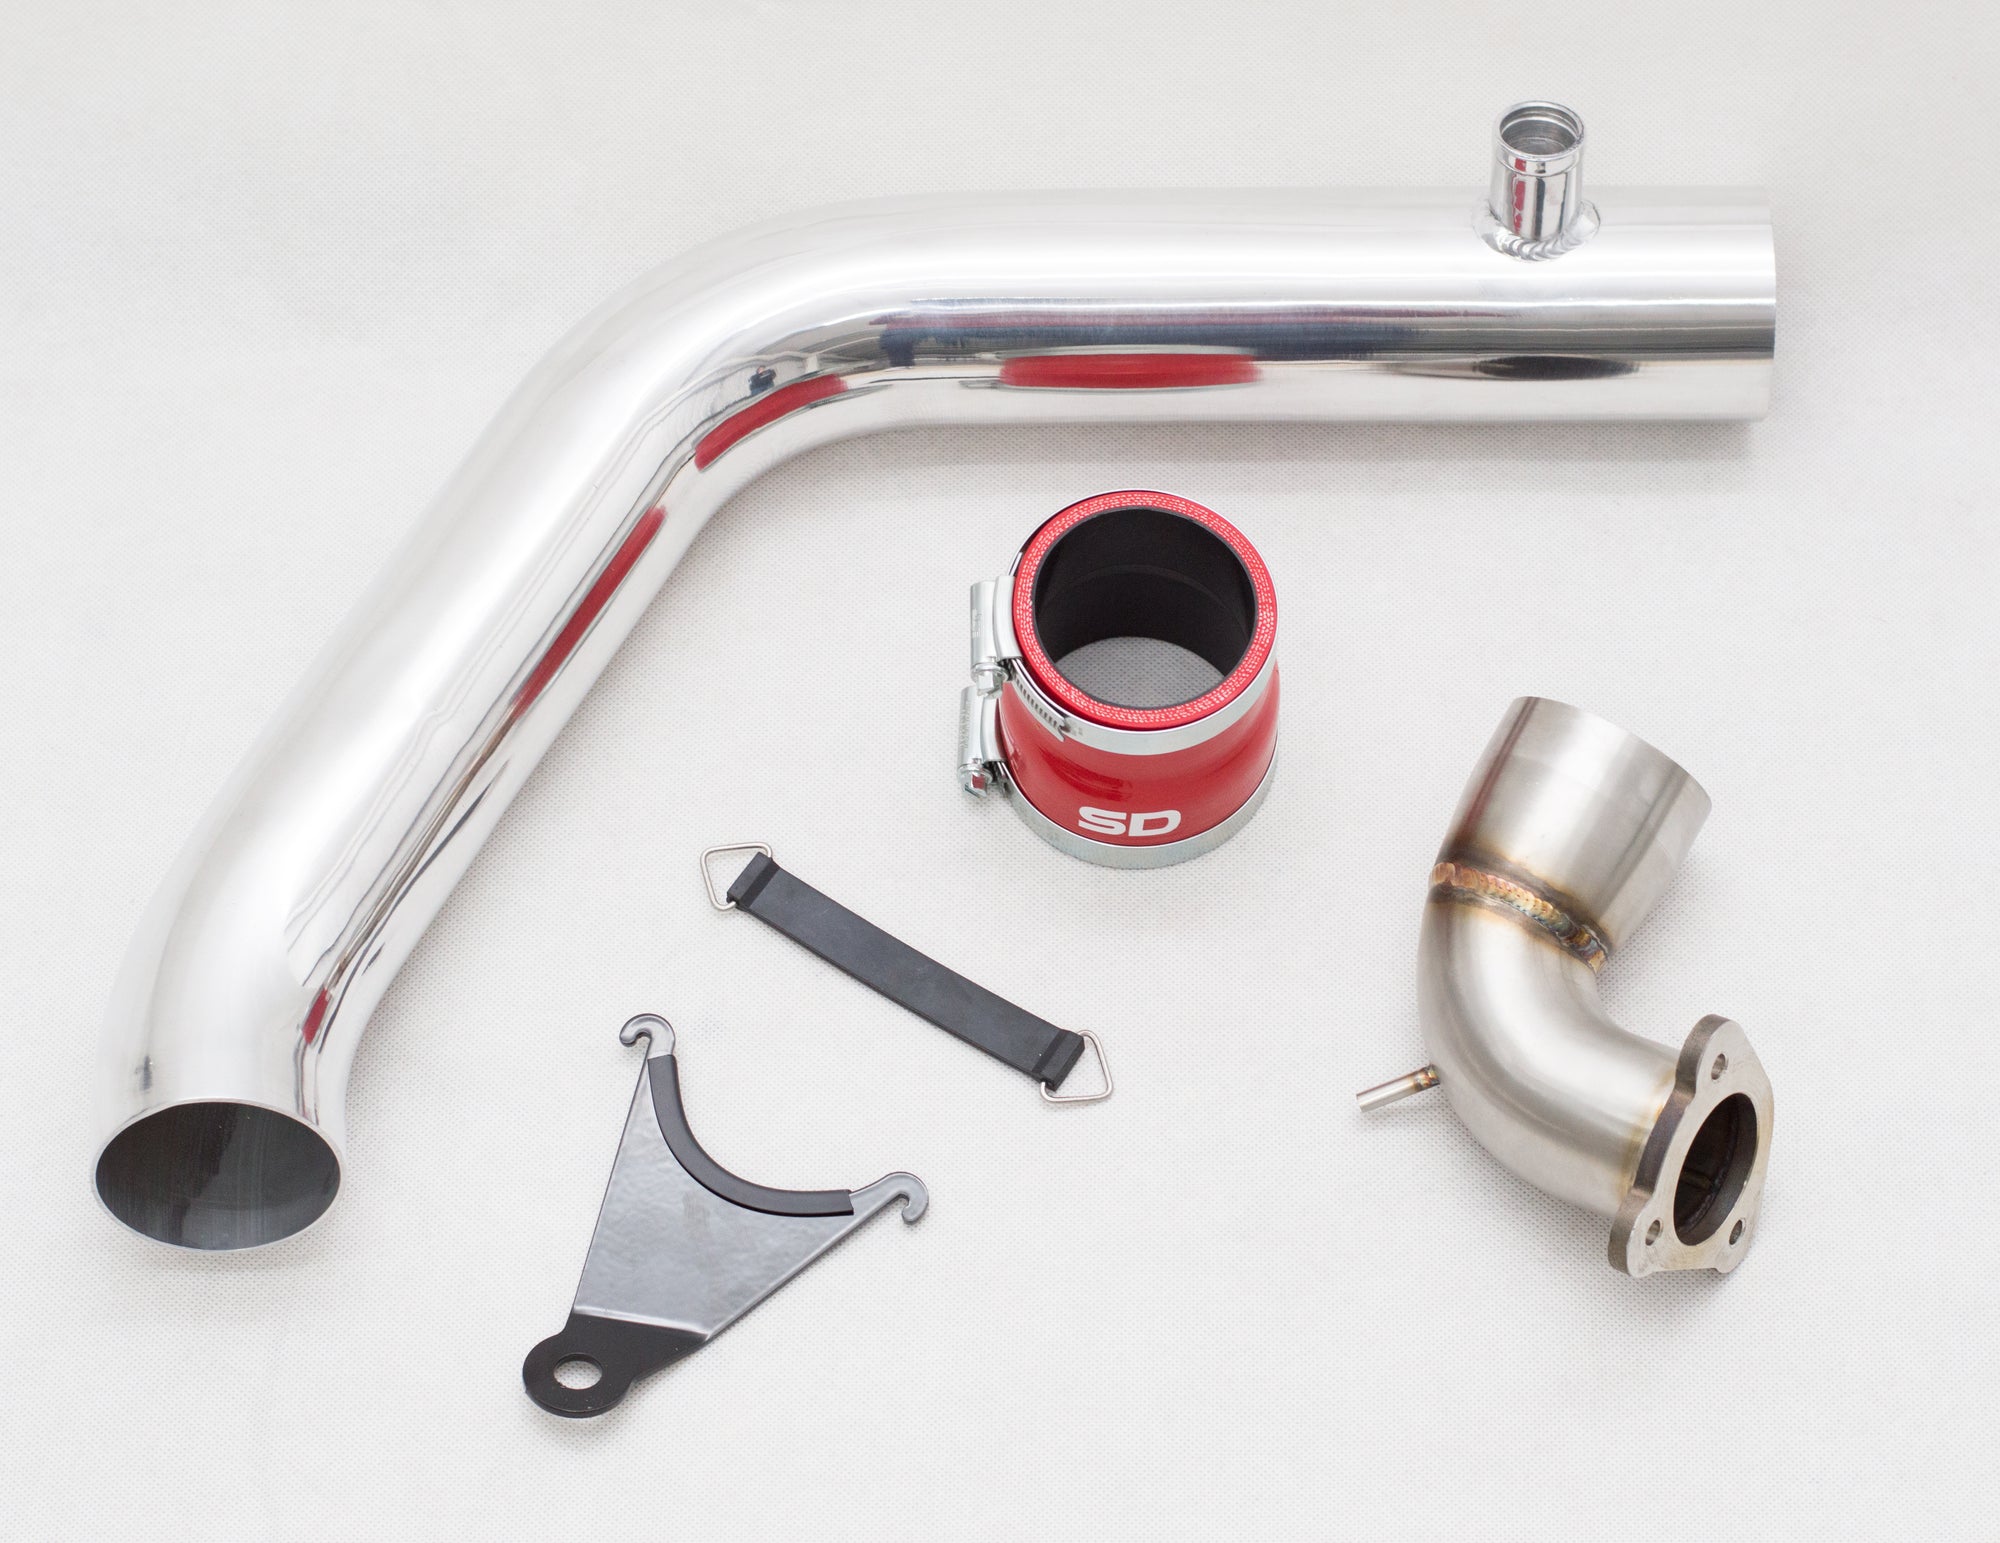 Fiesta MK7 ST 180 turbo elbow and crossover pipe combo